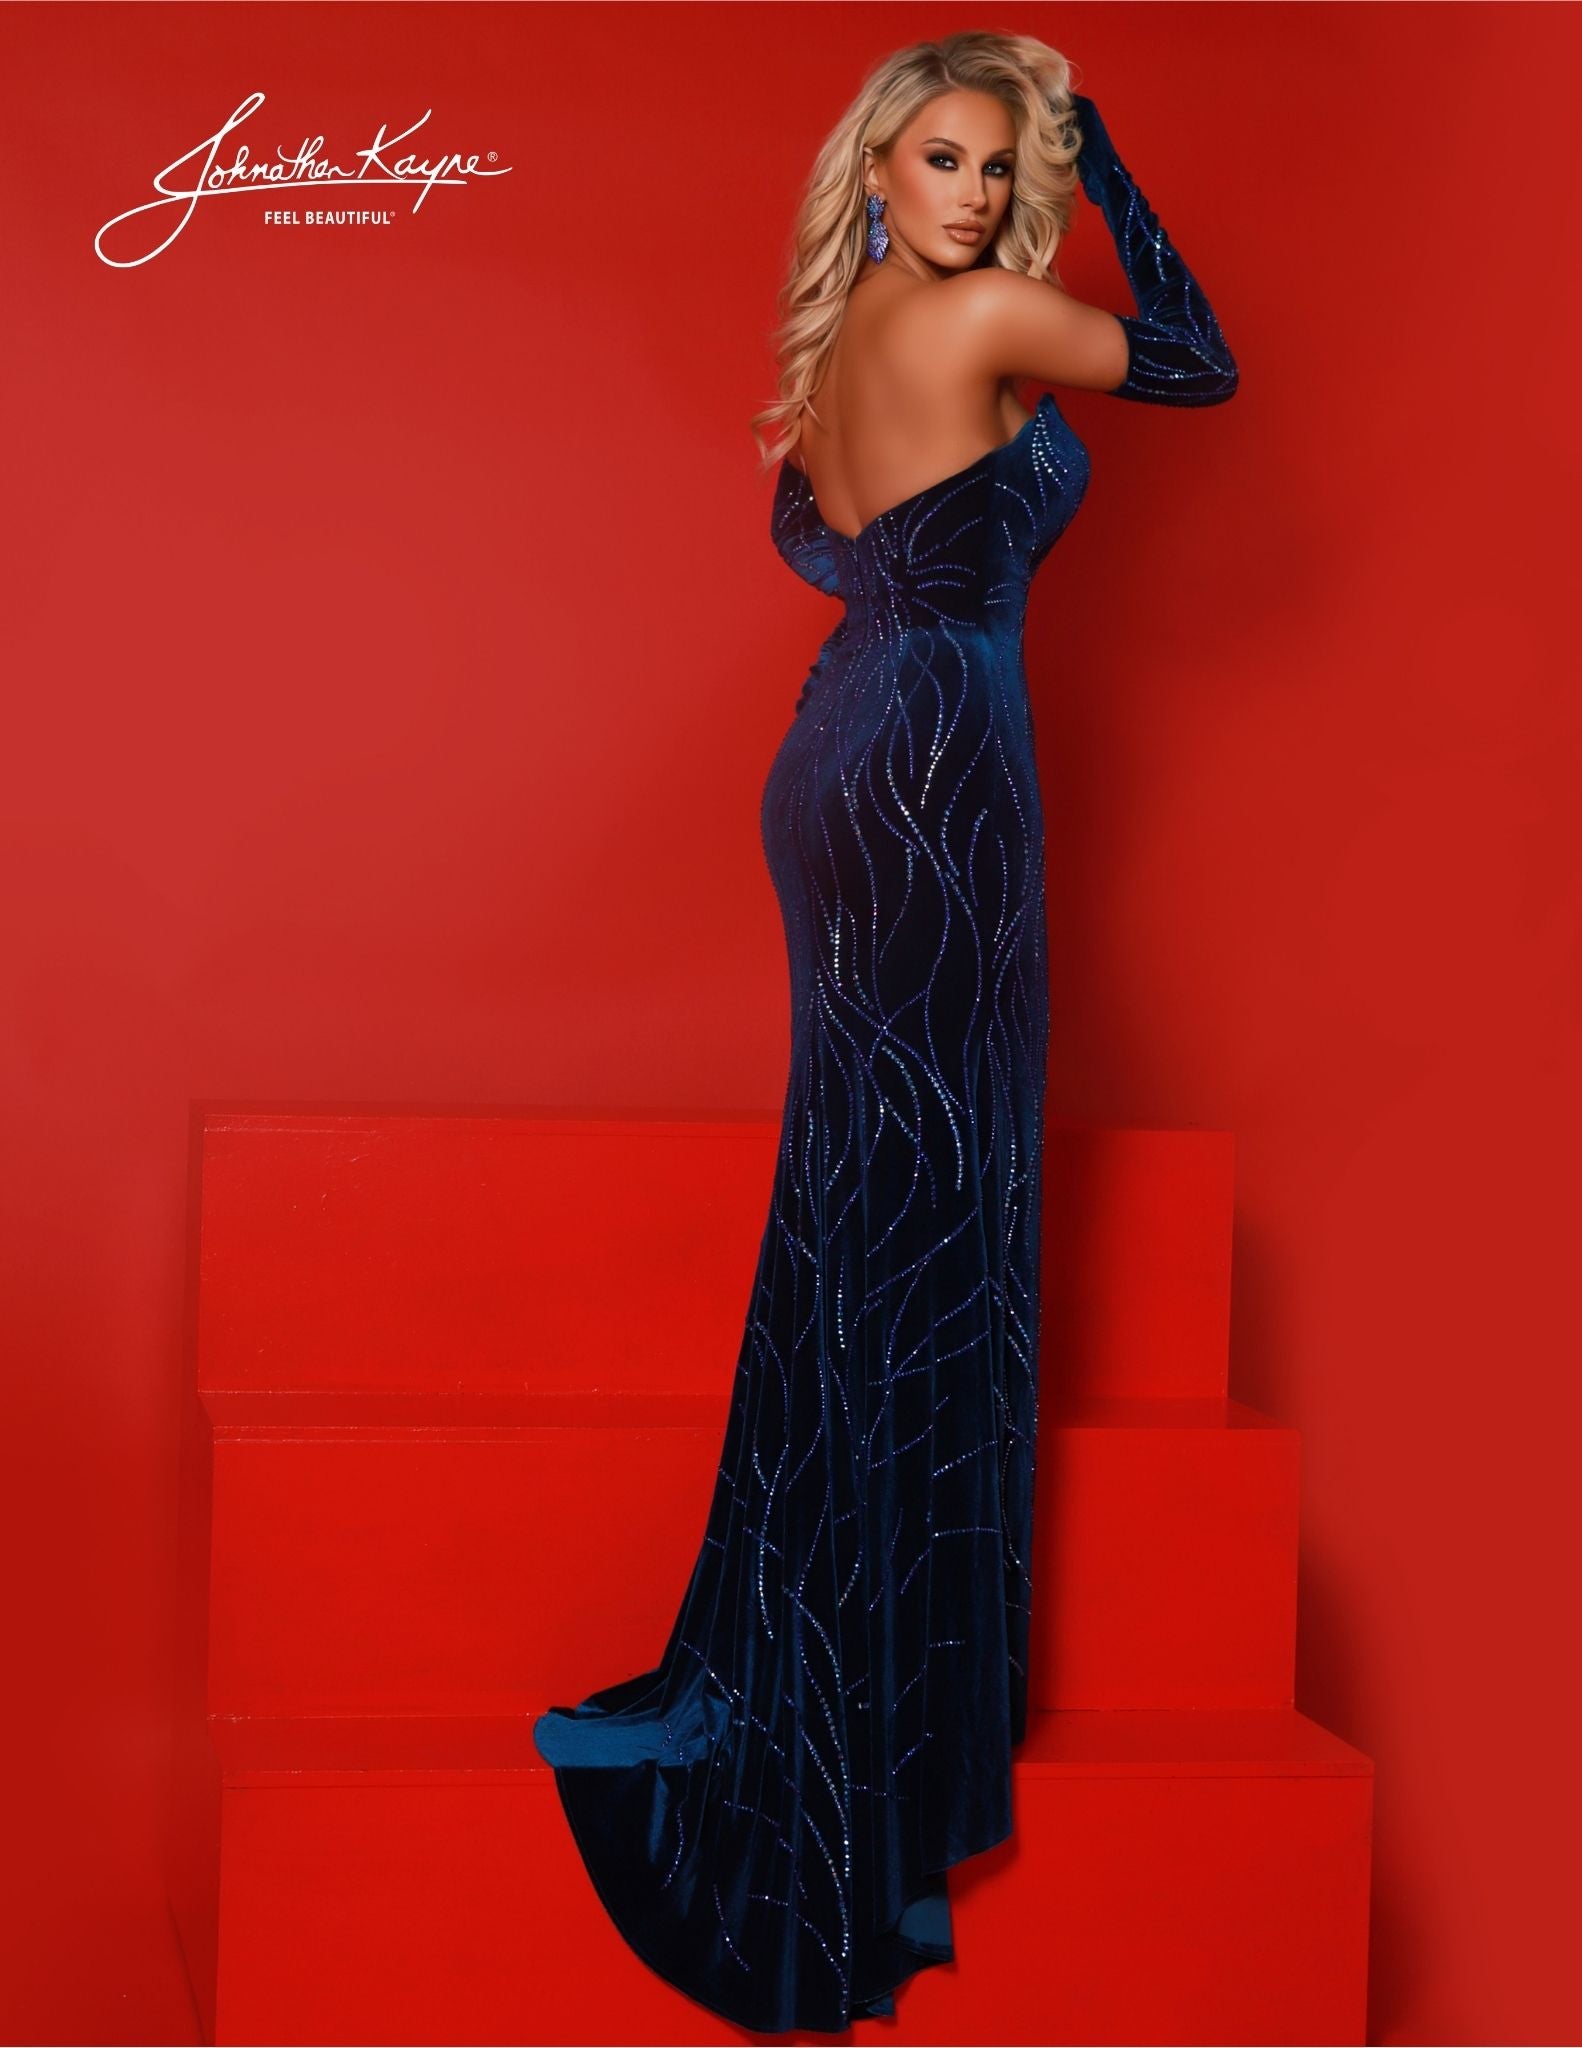 Designed for the sophisticated and stylish individual, the Johnathan Kayne 2890 dress features a sleek velvet material, adorned with sparkling crystal embellishments. The fitted silhouette and peak point slit add a touch of elegance and allure. Perfect for formal evening events, these gloves will make a statement and elevate any outfit. 